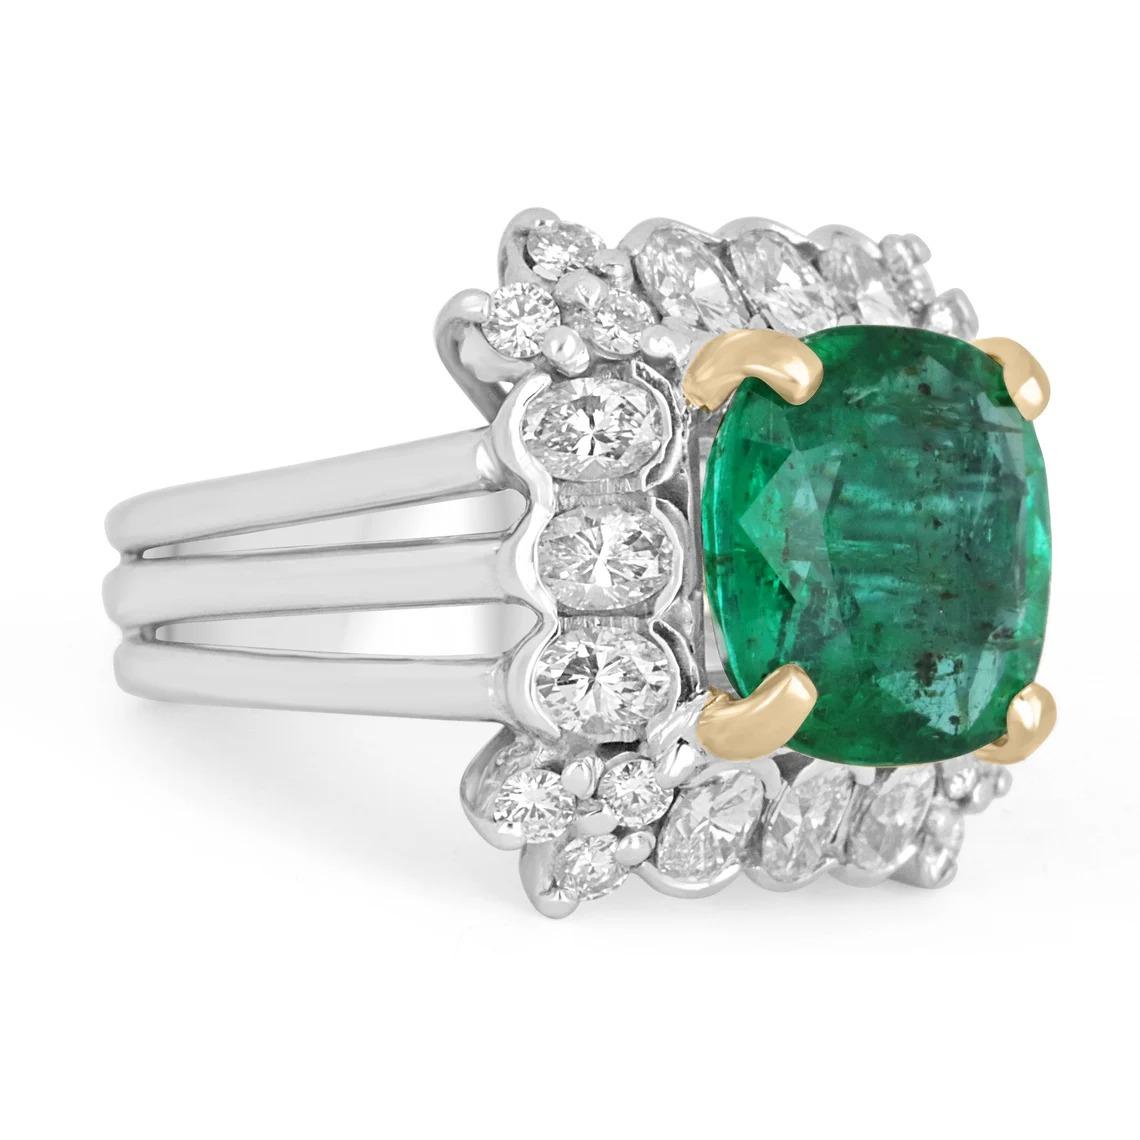 An extraordinary, custom-made Emerald & Diamond Cocktail Ring. The center stone features an impressive 4.89-carat natural Zambian emerald with gorgeous characteristics. The gemstone displays a desirable, yellowish-dark green color, and